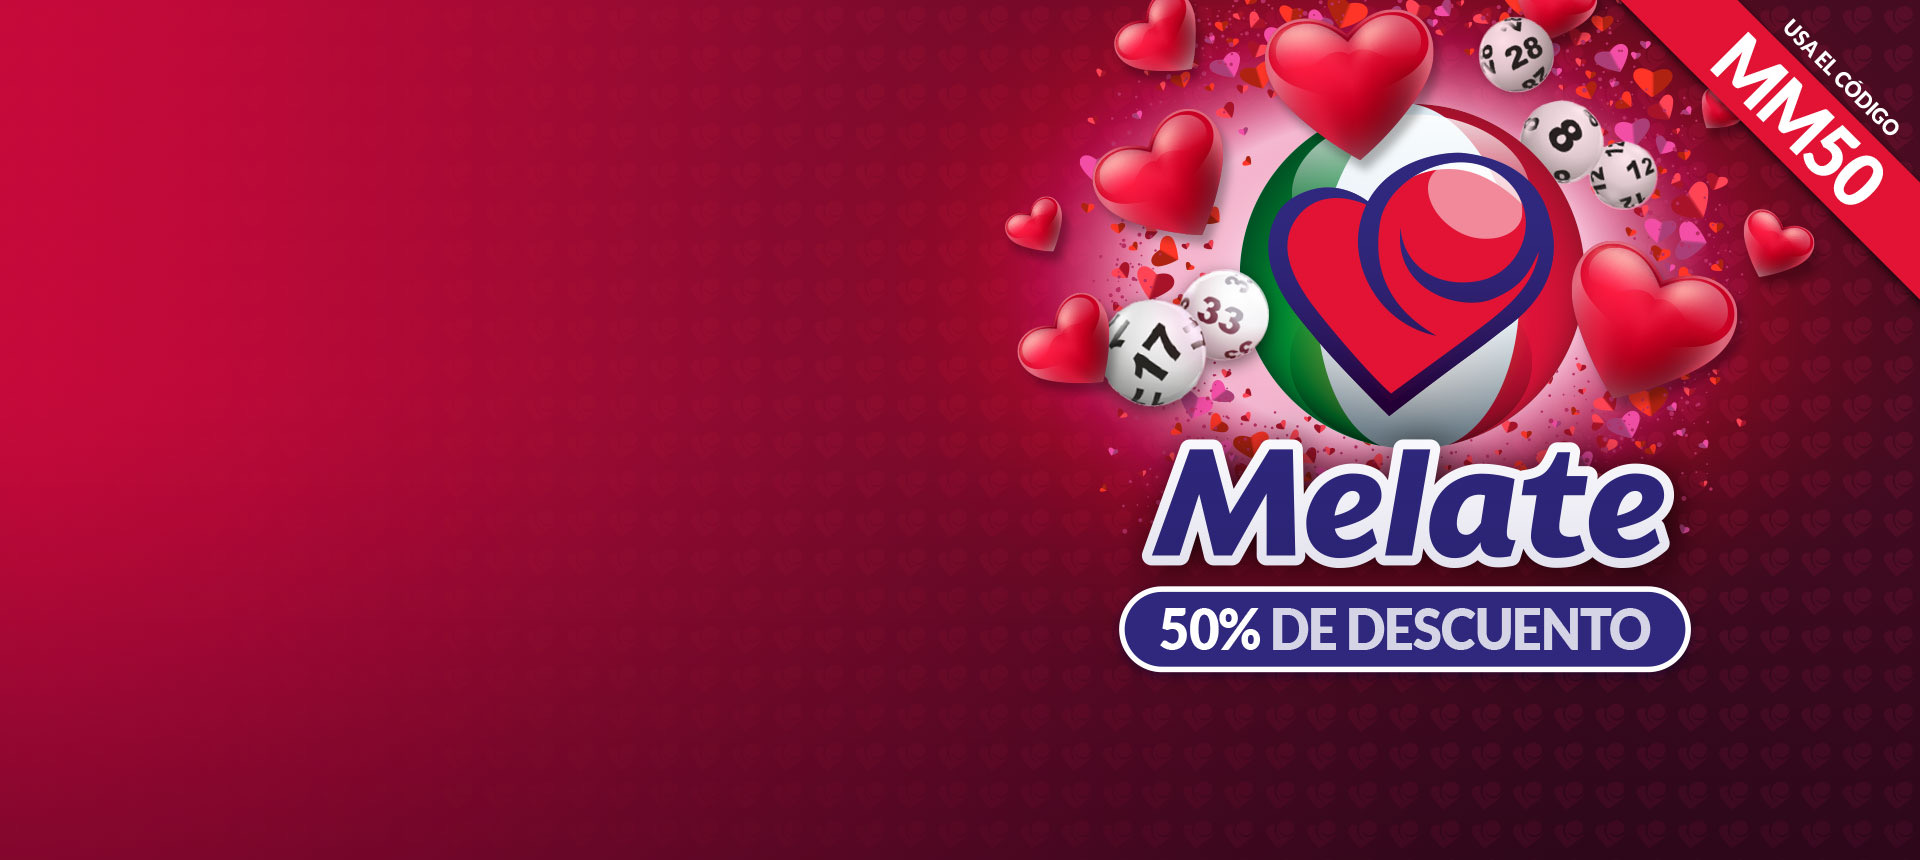 Play Melate with a 50% discount on all tickets using the promo code MM50!